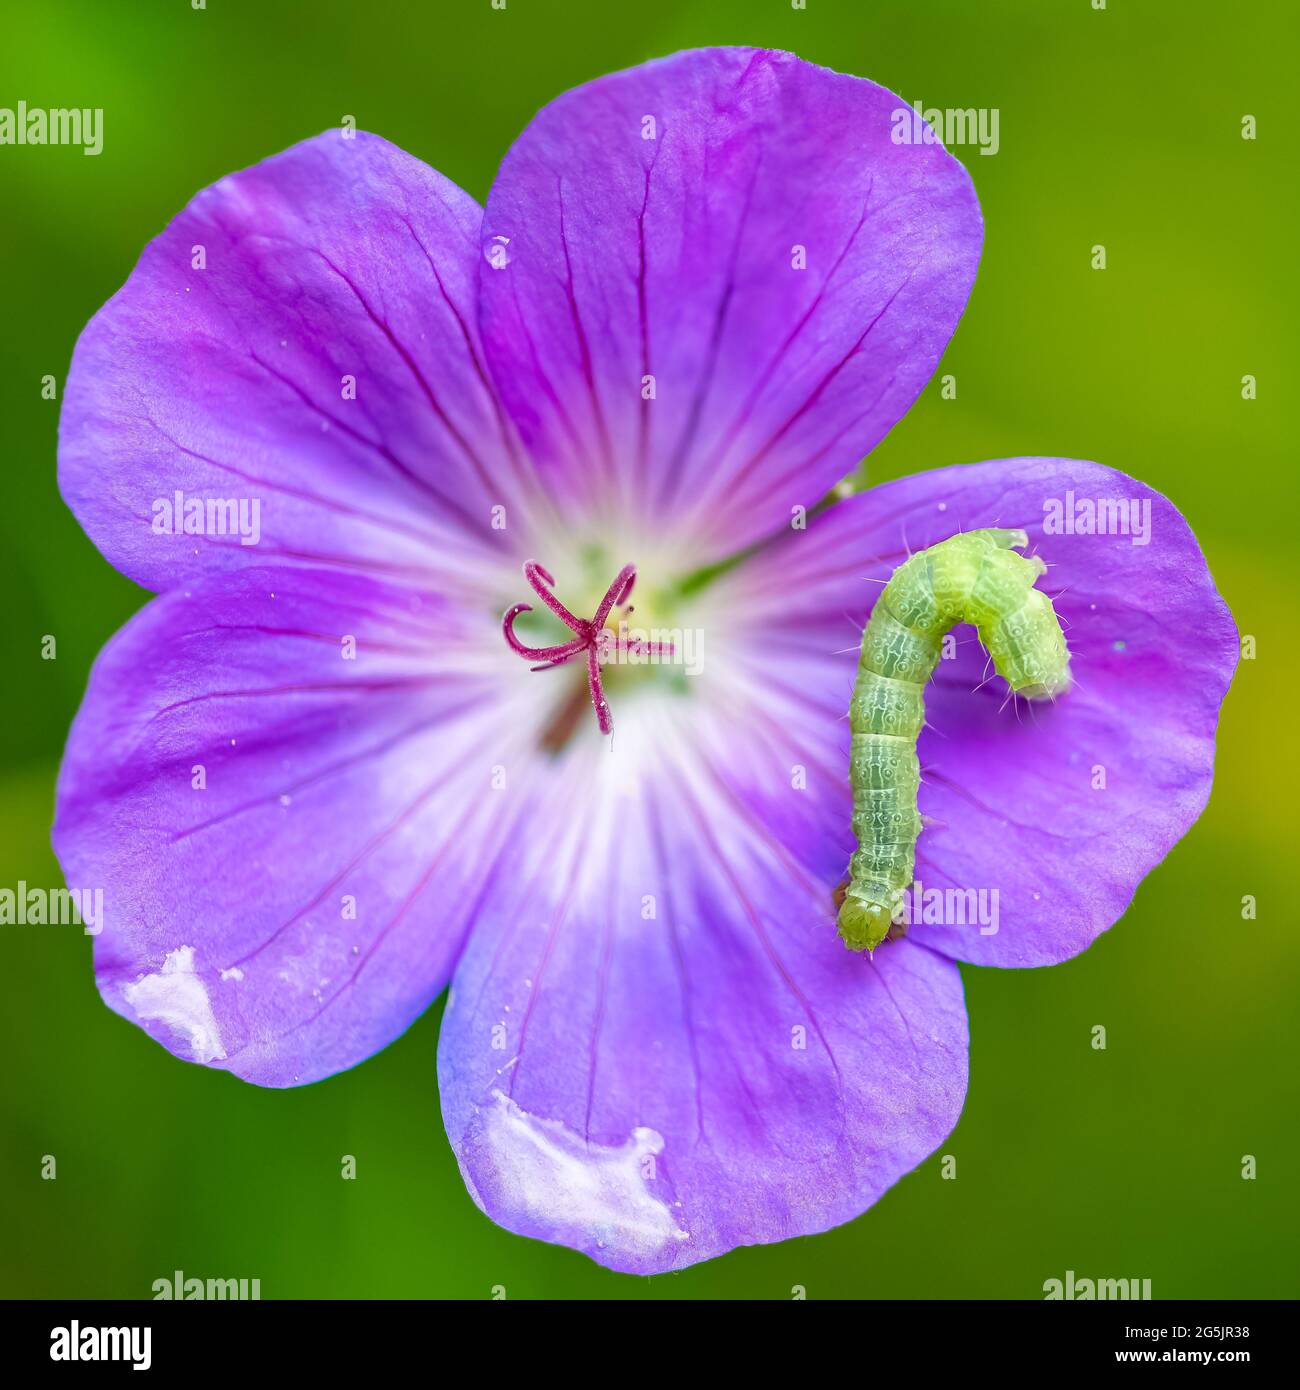 A green caterpillar on a purple flower, colorful insect in the garden Stock Photo